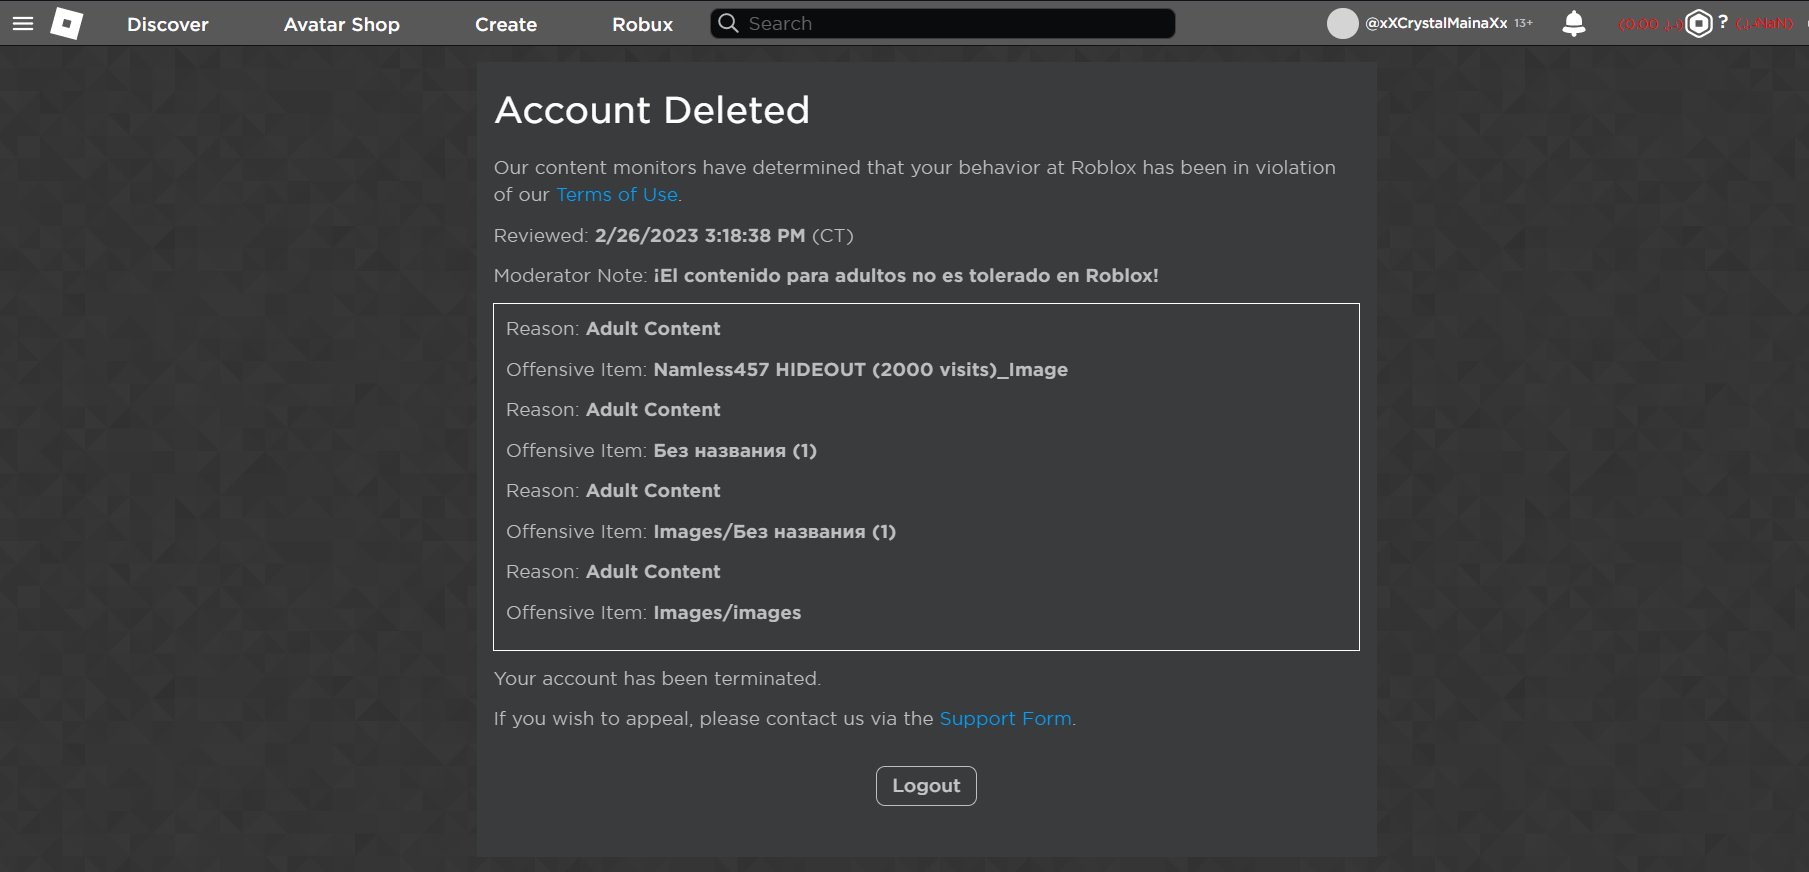 How To Create An Account on Roblox?